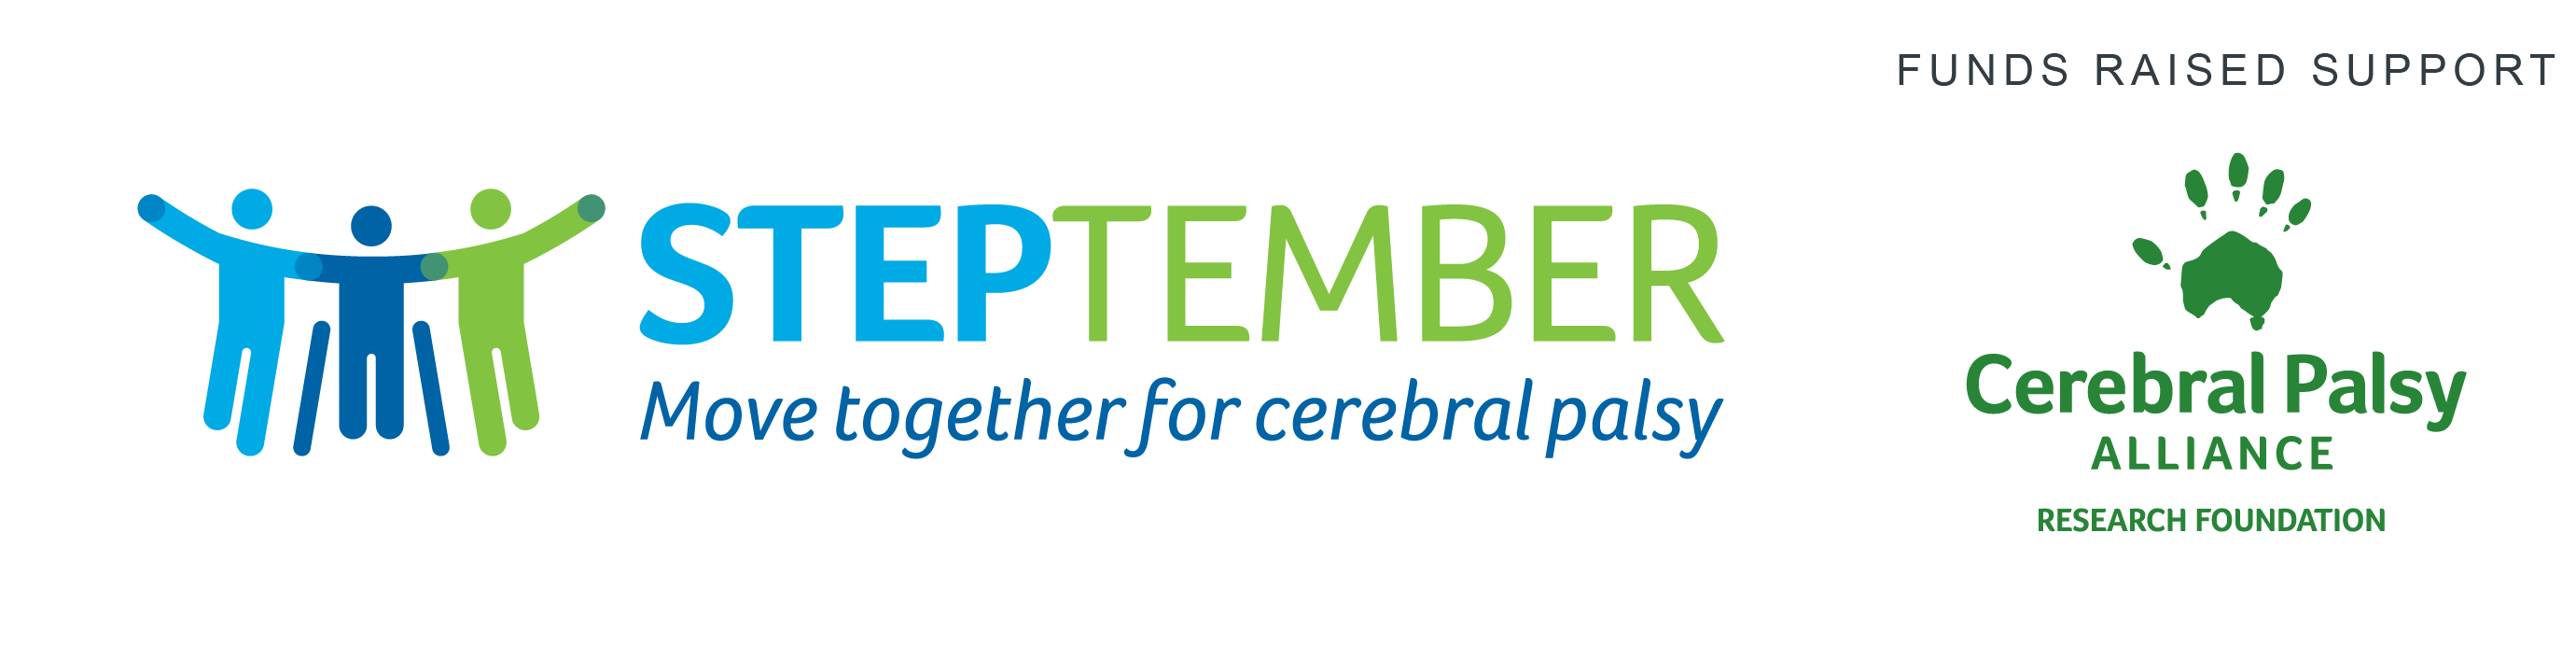 Logo with the words Steptember move together for cerebral palsy